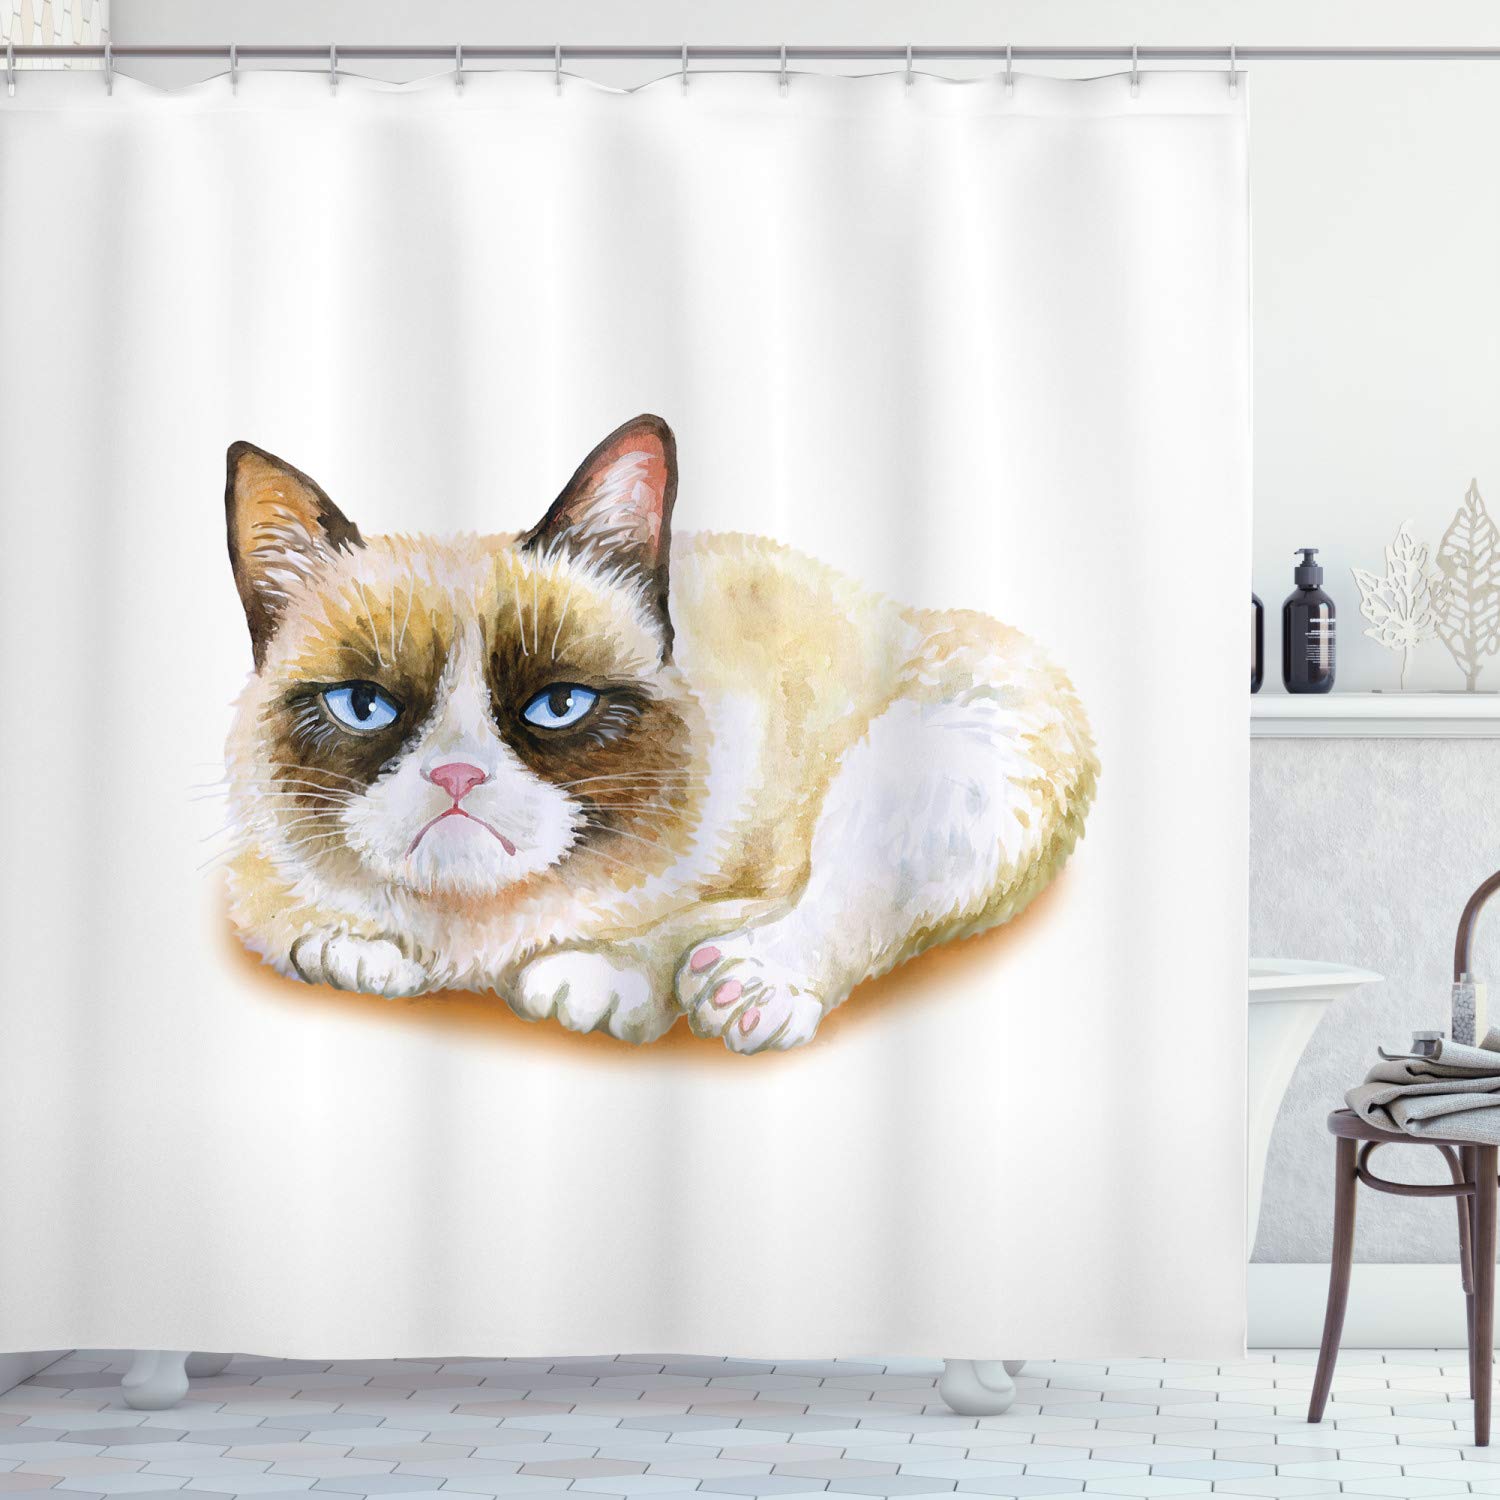 Ambesonne Animal Shower Curtain, Grumpy Siamese Cat Angry Paws Asian Kitten Moody Feline Fluffy Love Art Print, Fabric Bathroom Decor Set with Hooks, 84 Inches Extra Long, Brown and Beige